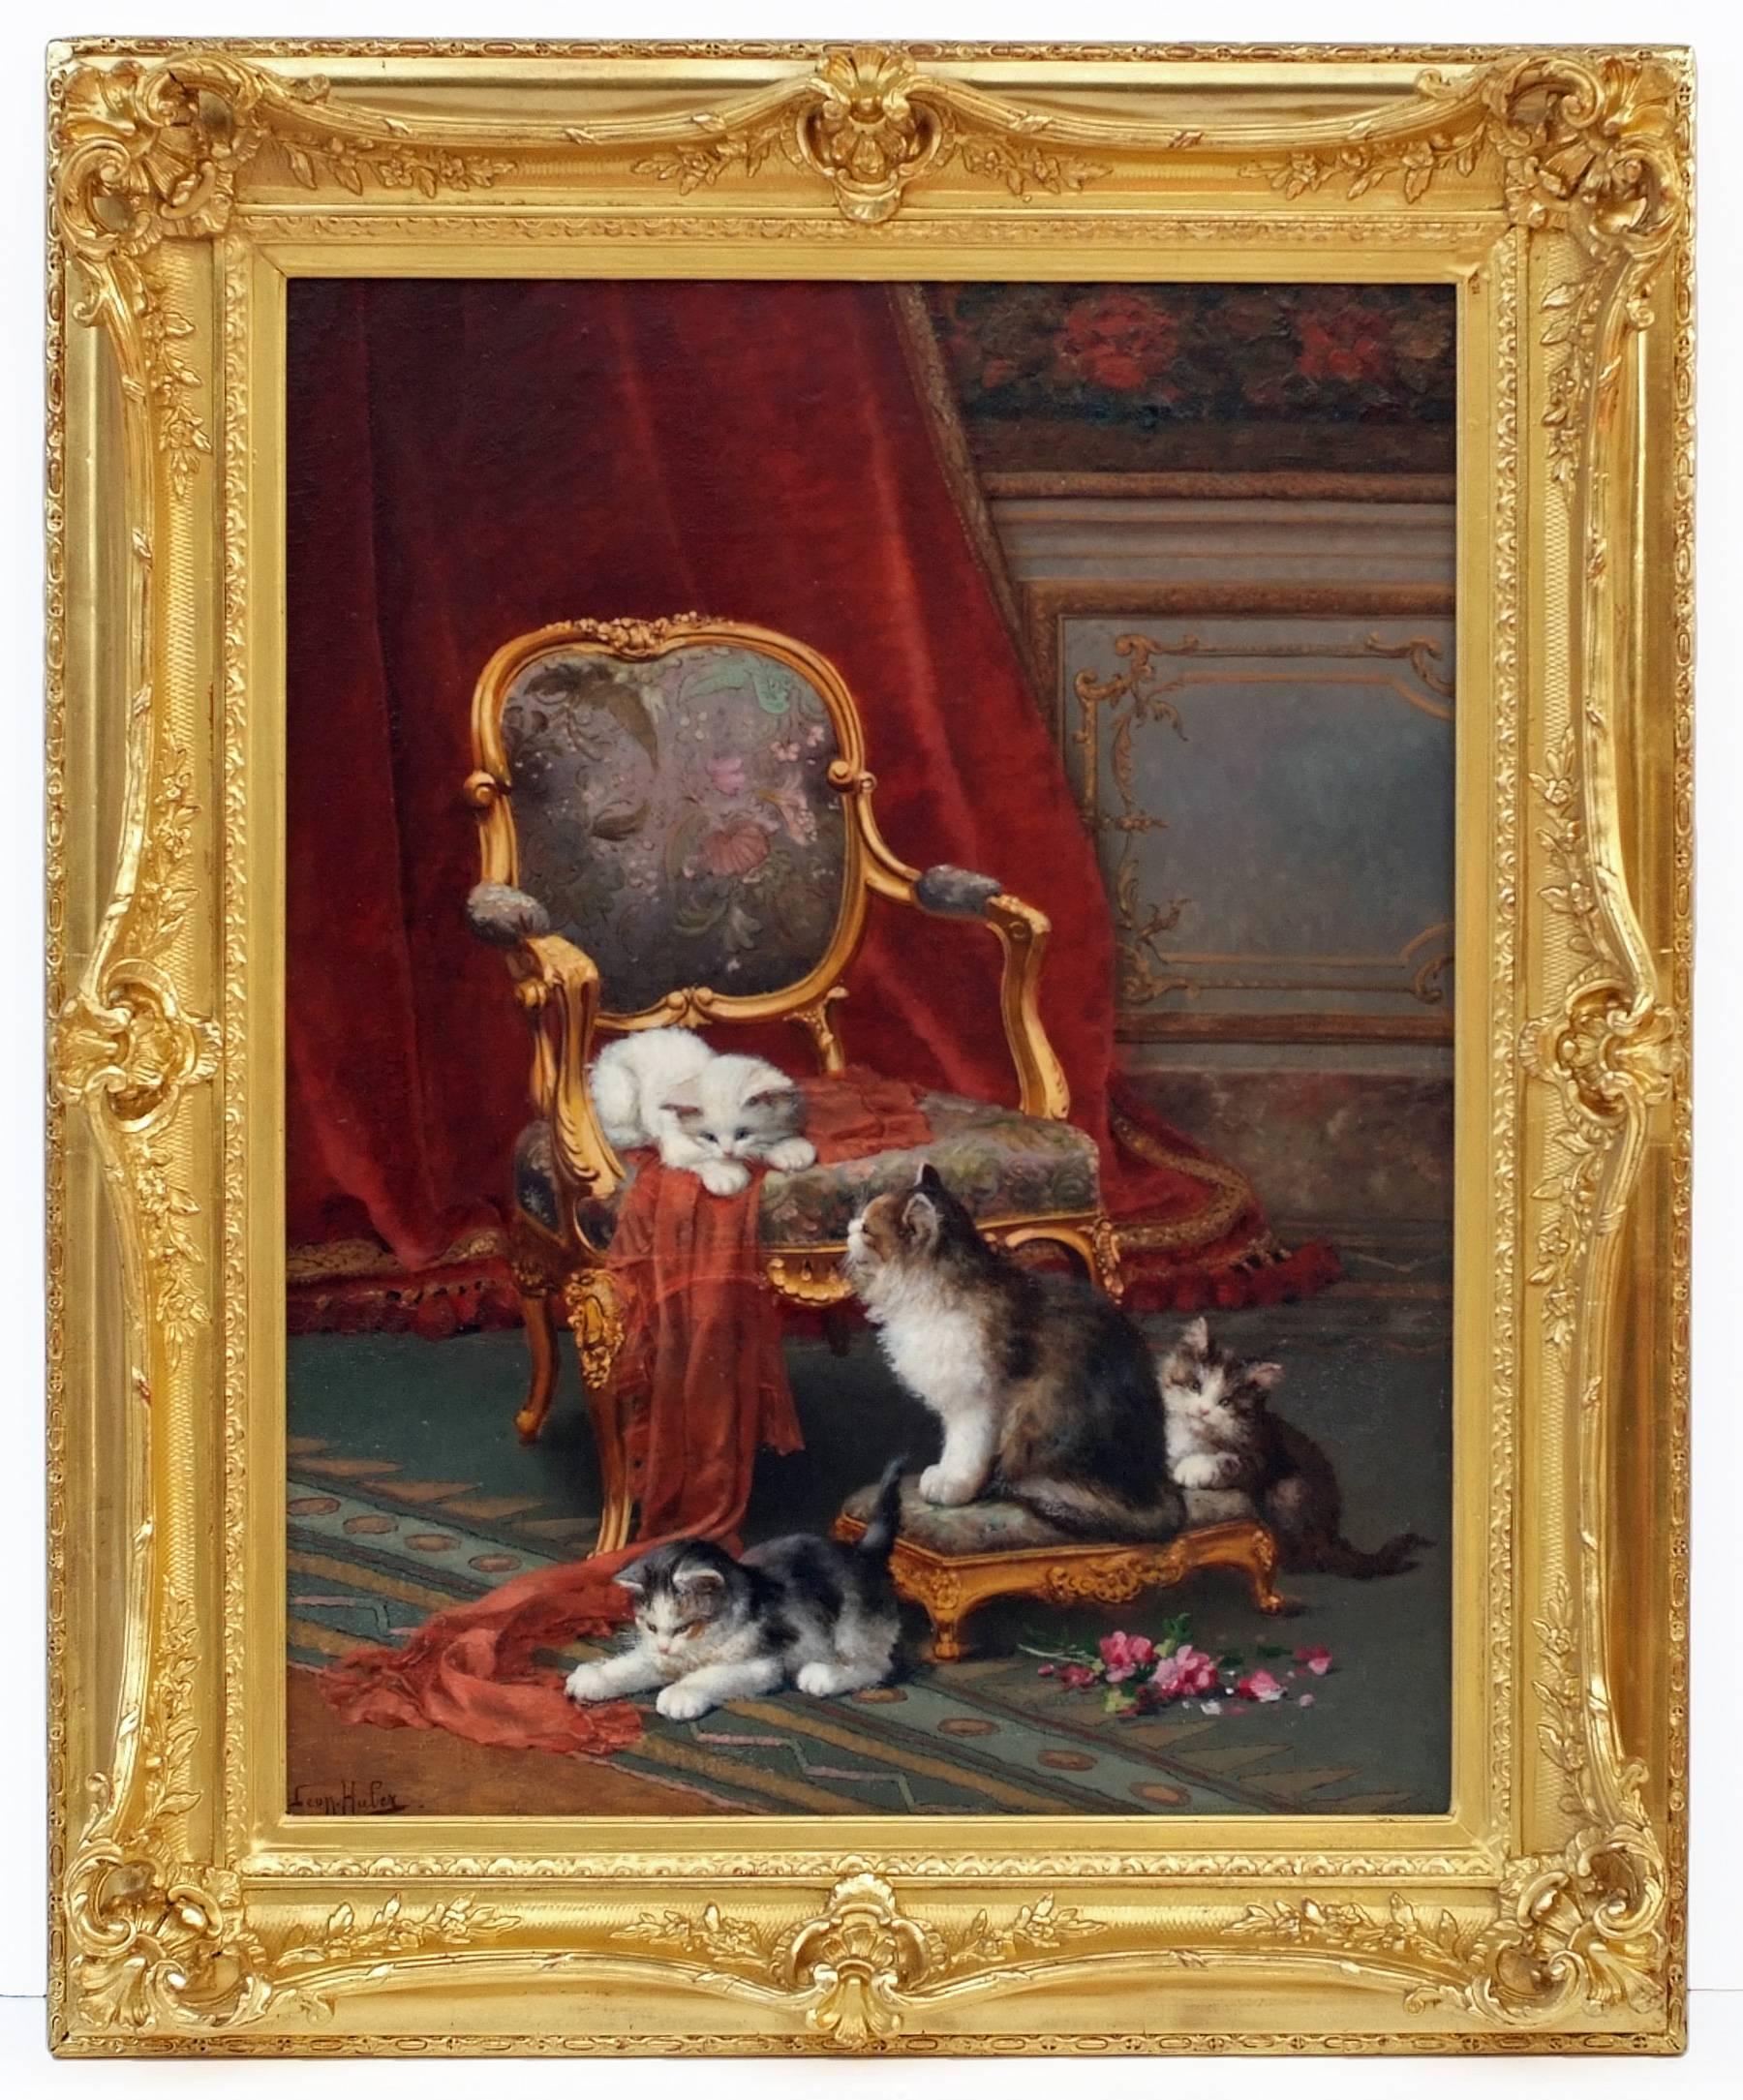 Léon Charles Huber Interior Painting - HUBER Léon Charles - Academic painting 19th century - Interior with Cats